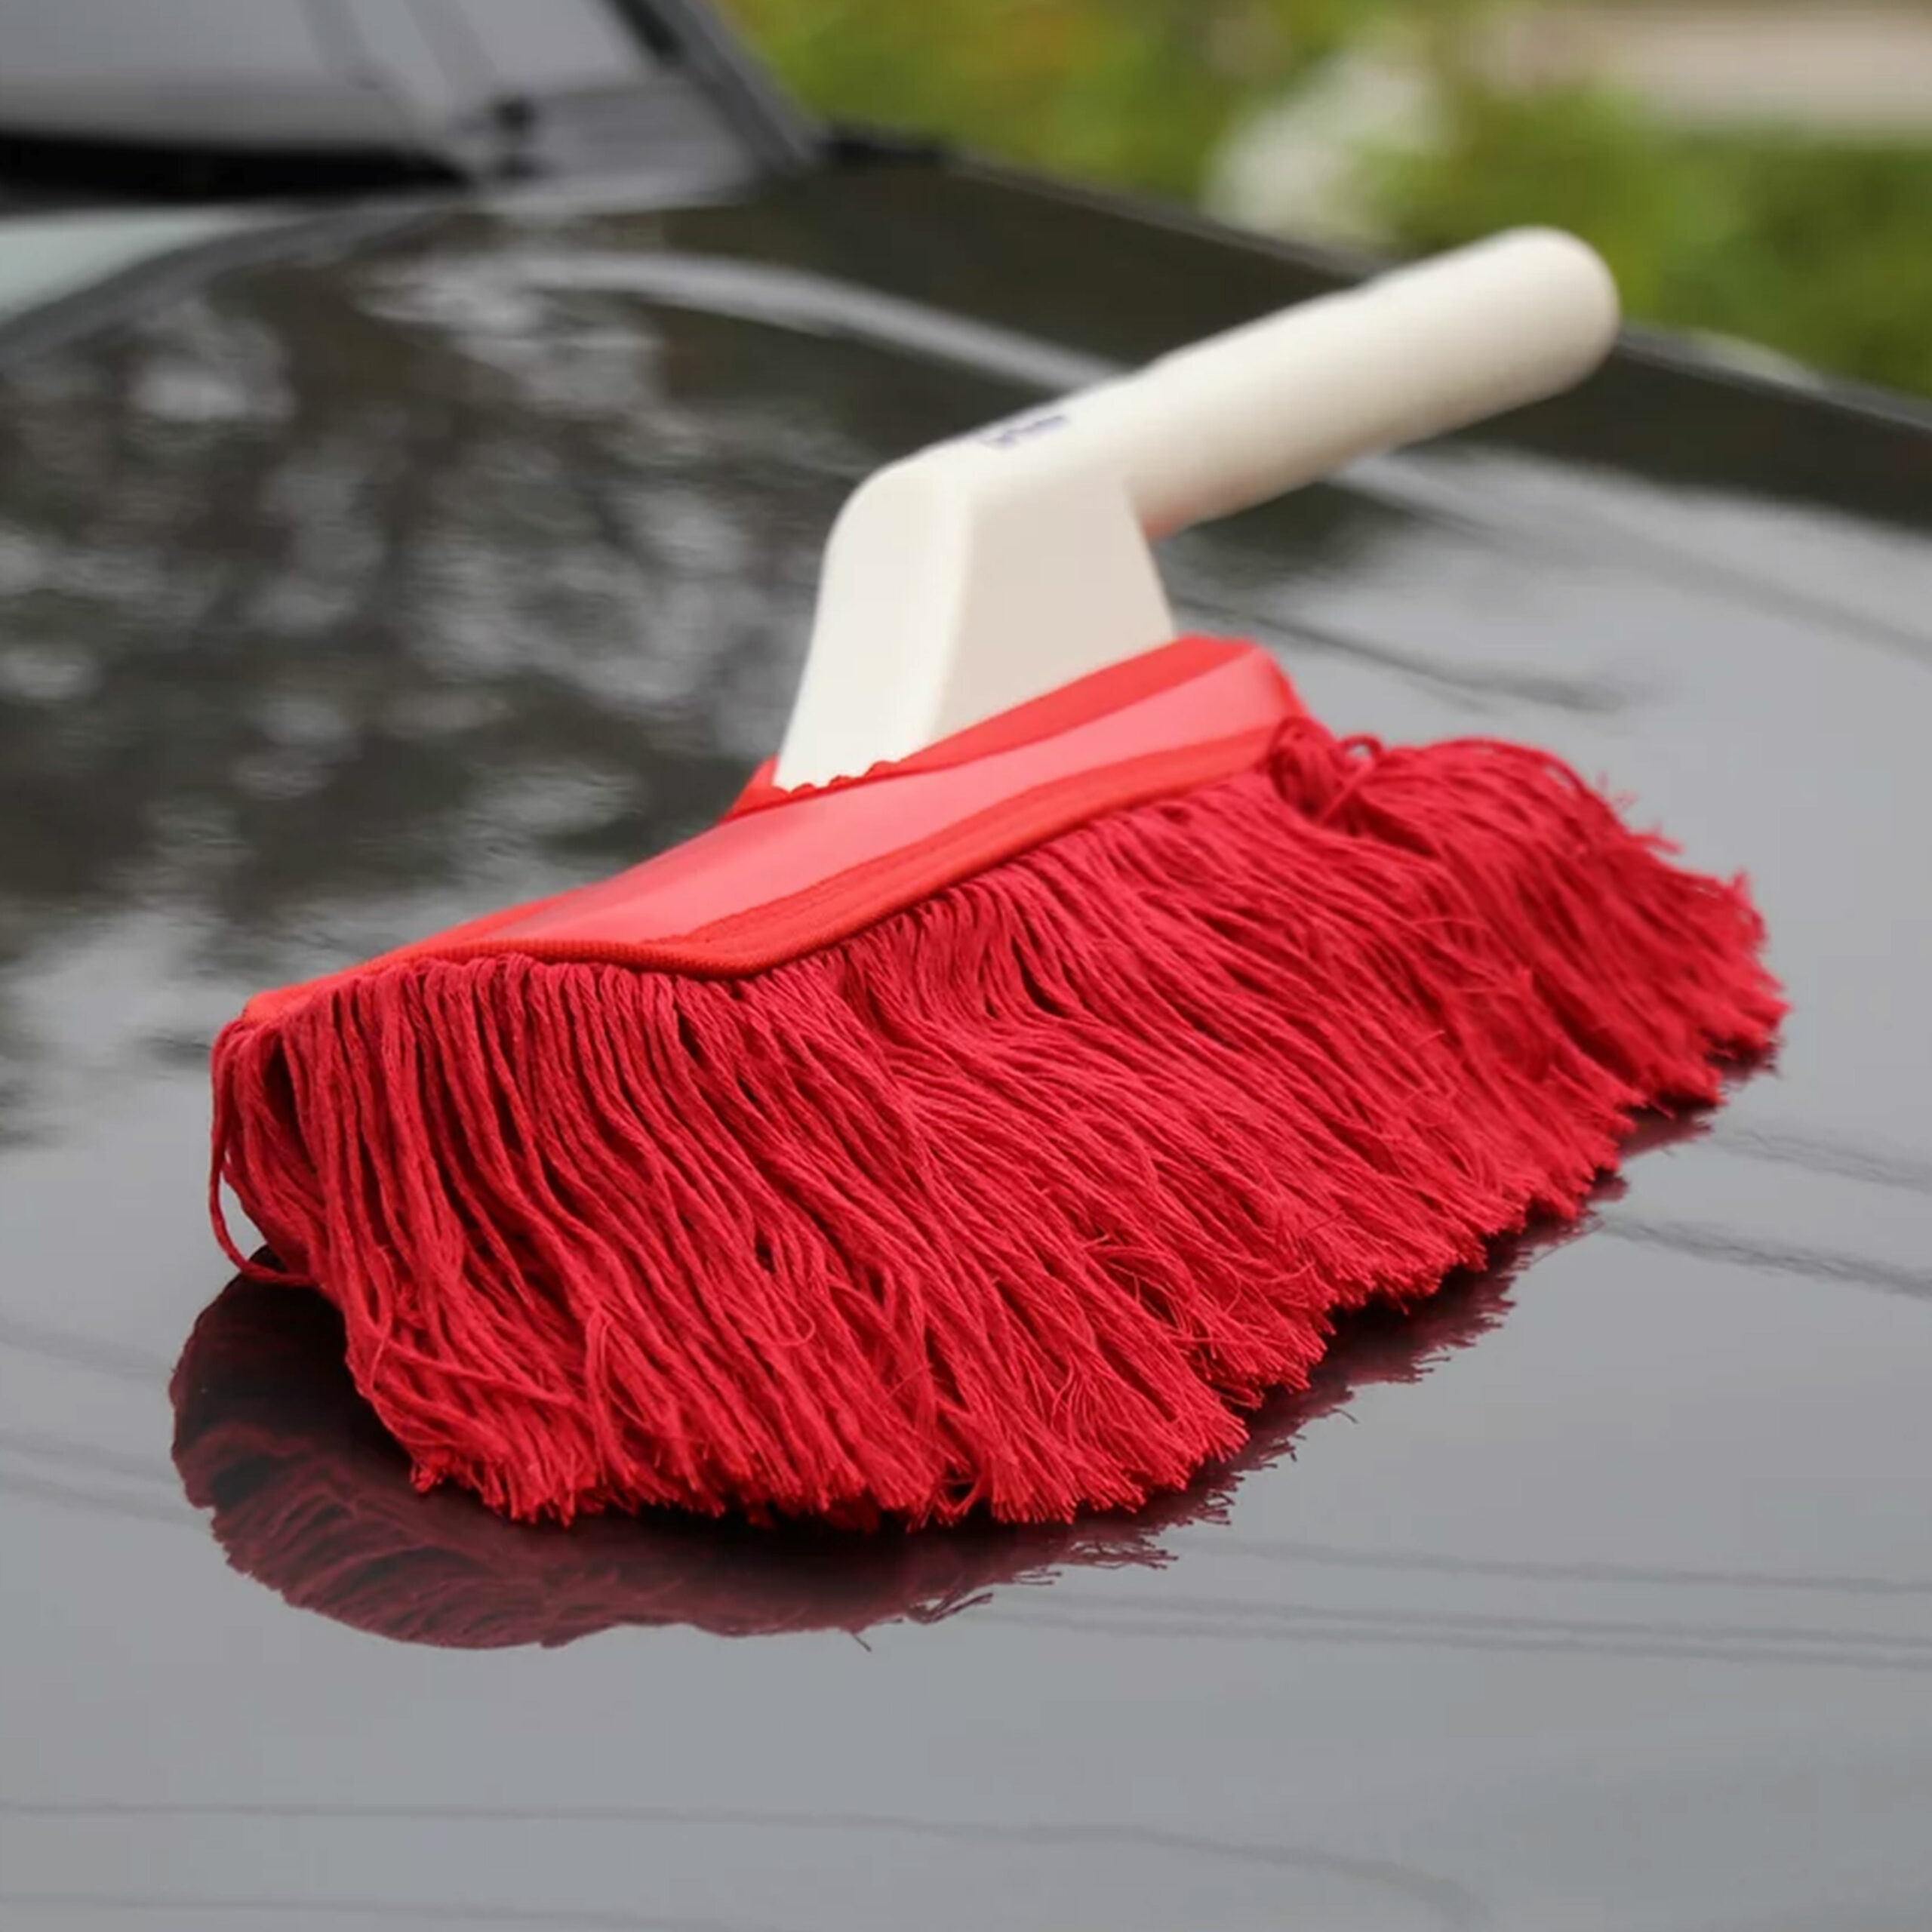 Where to Buy  California Car Duster